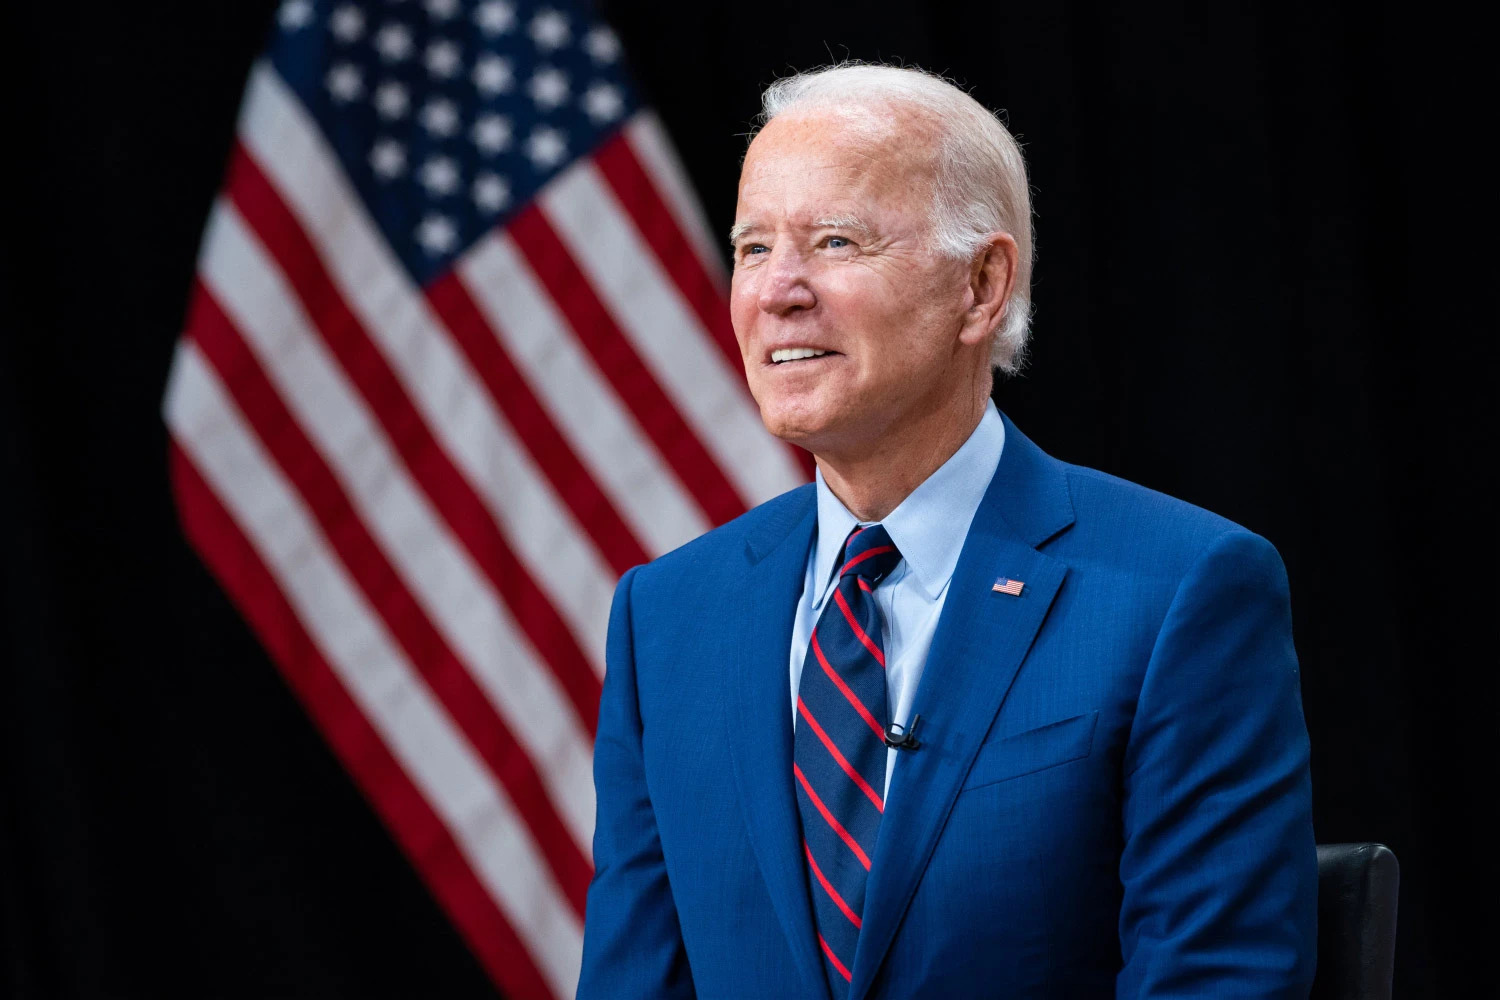 Biden Approval Rises 40% - His Highest Approval Rating After Historical Lows